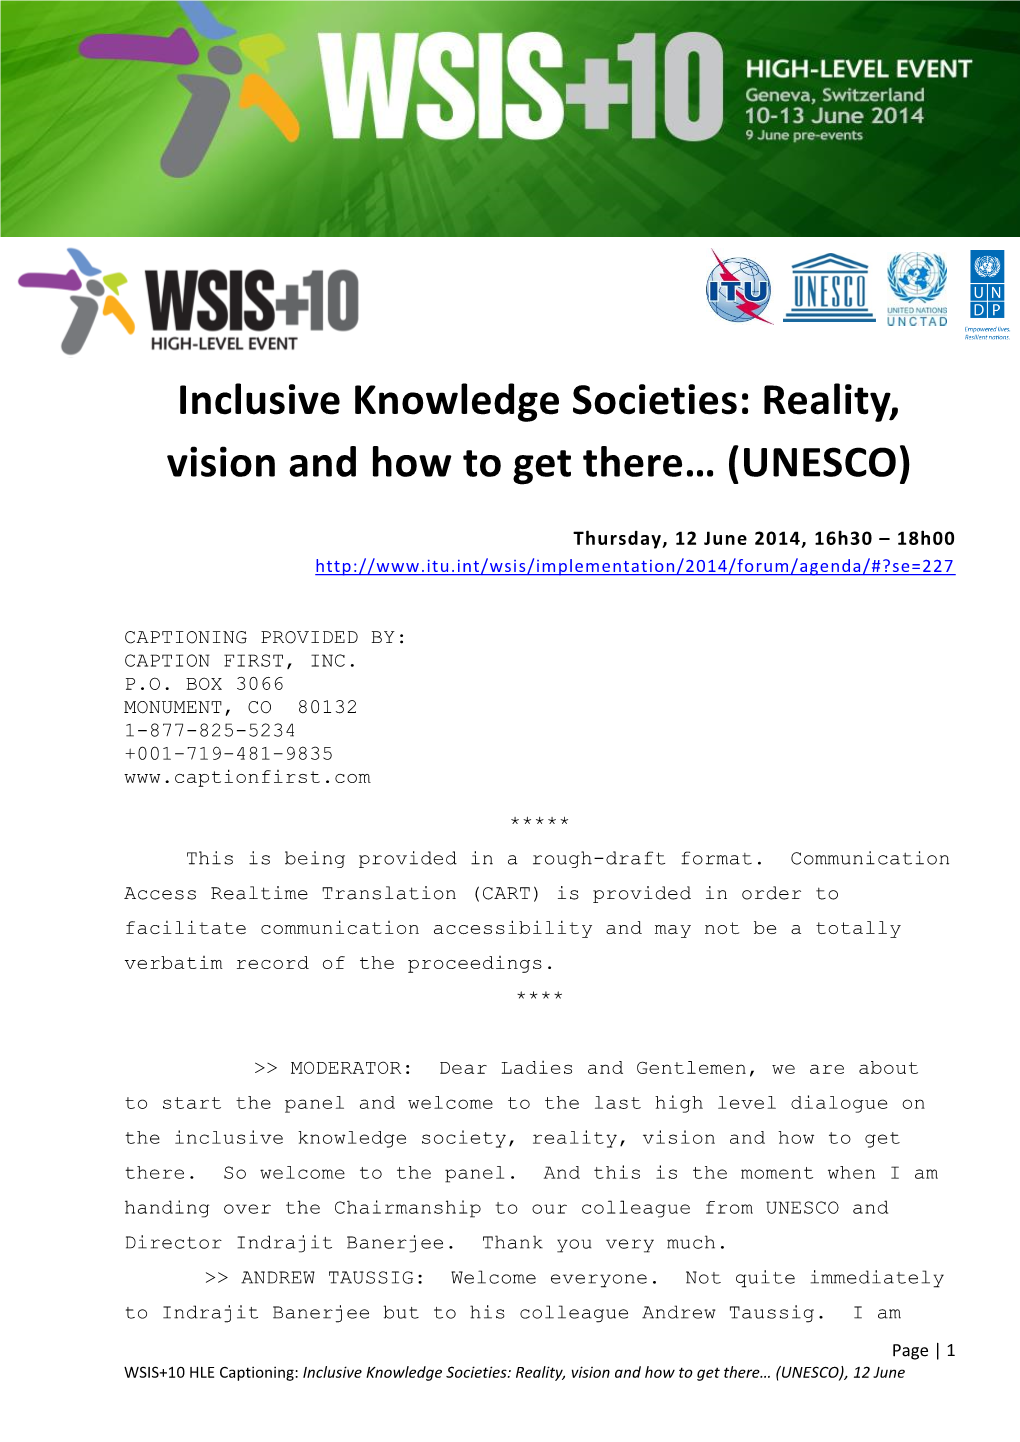 Inclusive Knowledge Societies: Reality, Vision and How to Get There… (UNESCO)